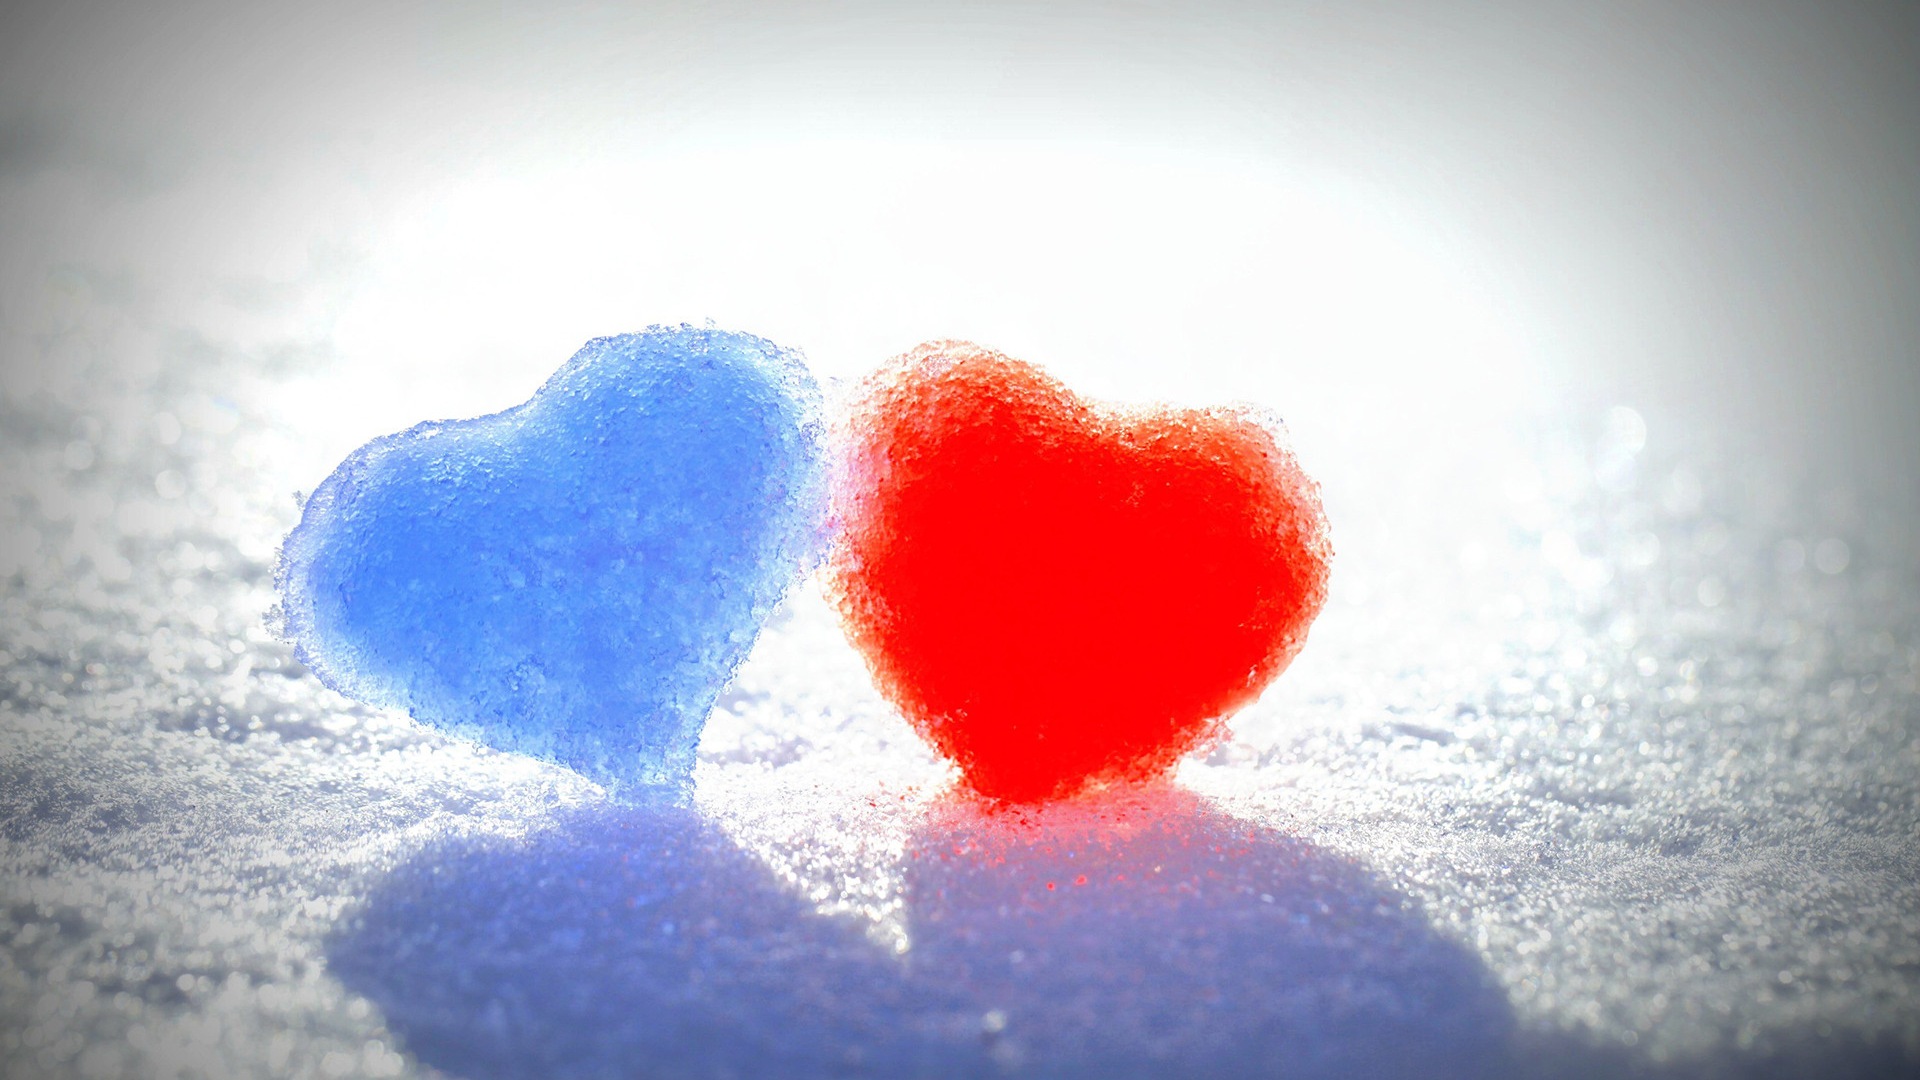 The theme of love, creative heart-shaped HD wallpapers #13 - 1920x1080